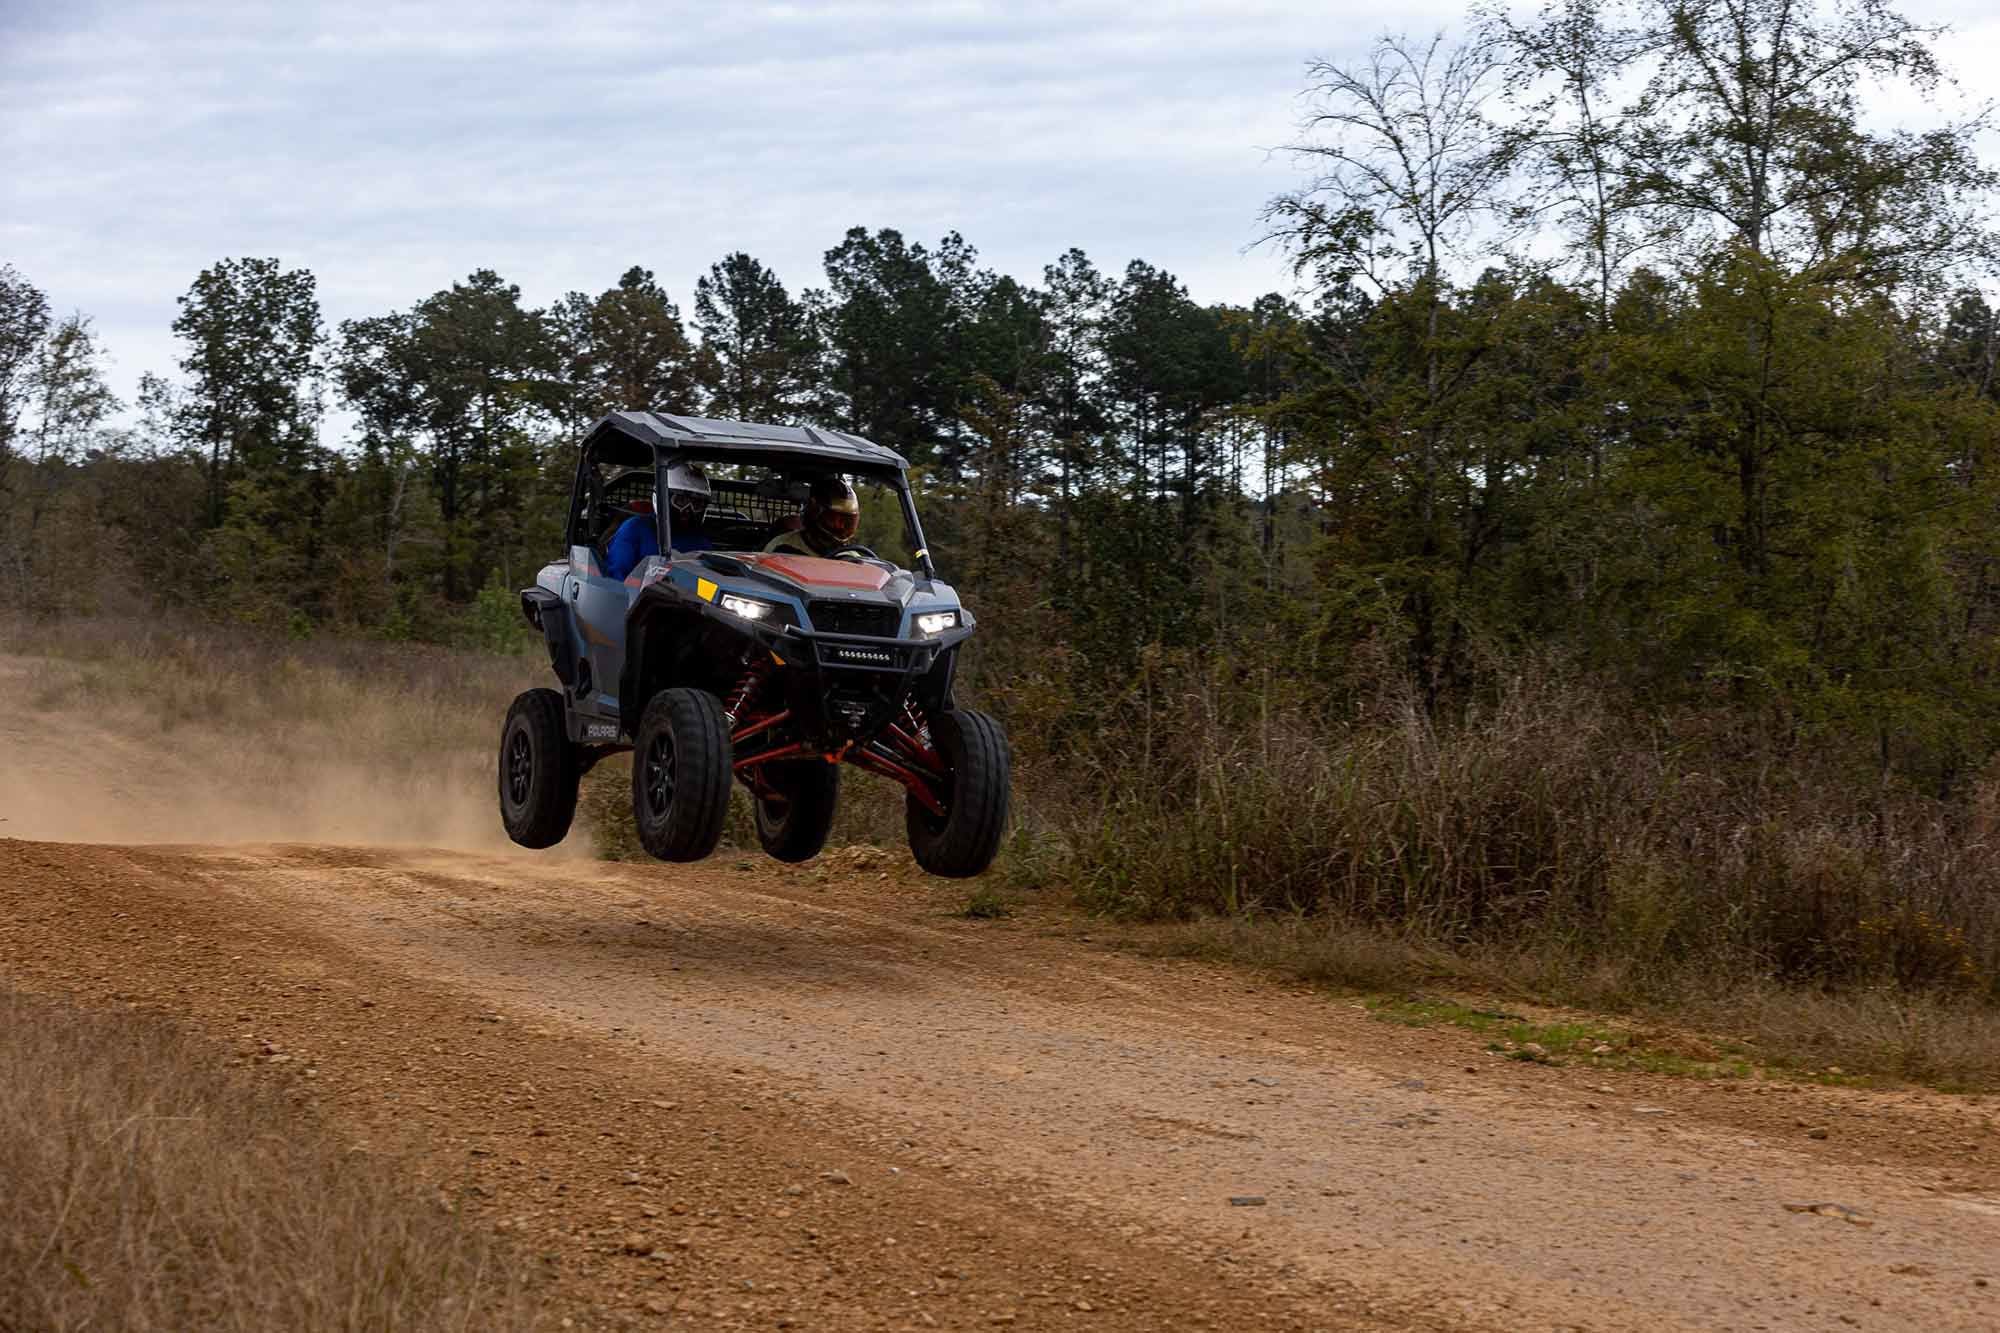 It’s big, but with stout Walker Evans shocks, hefty sway bars, and 100 hp, the Trailhead Edition flies like a much smaller rig.